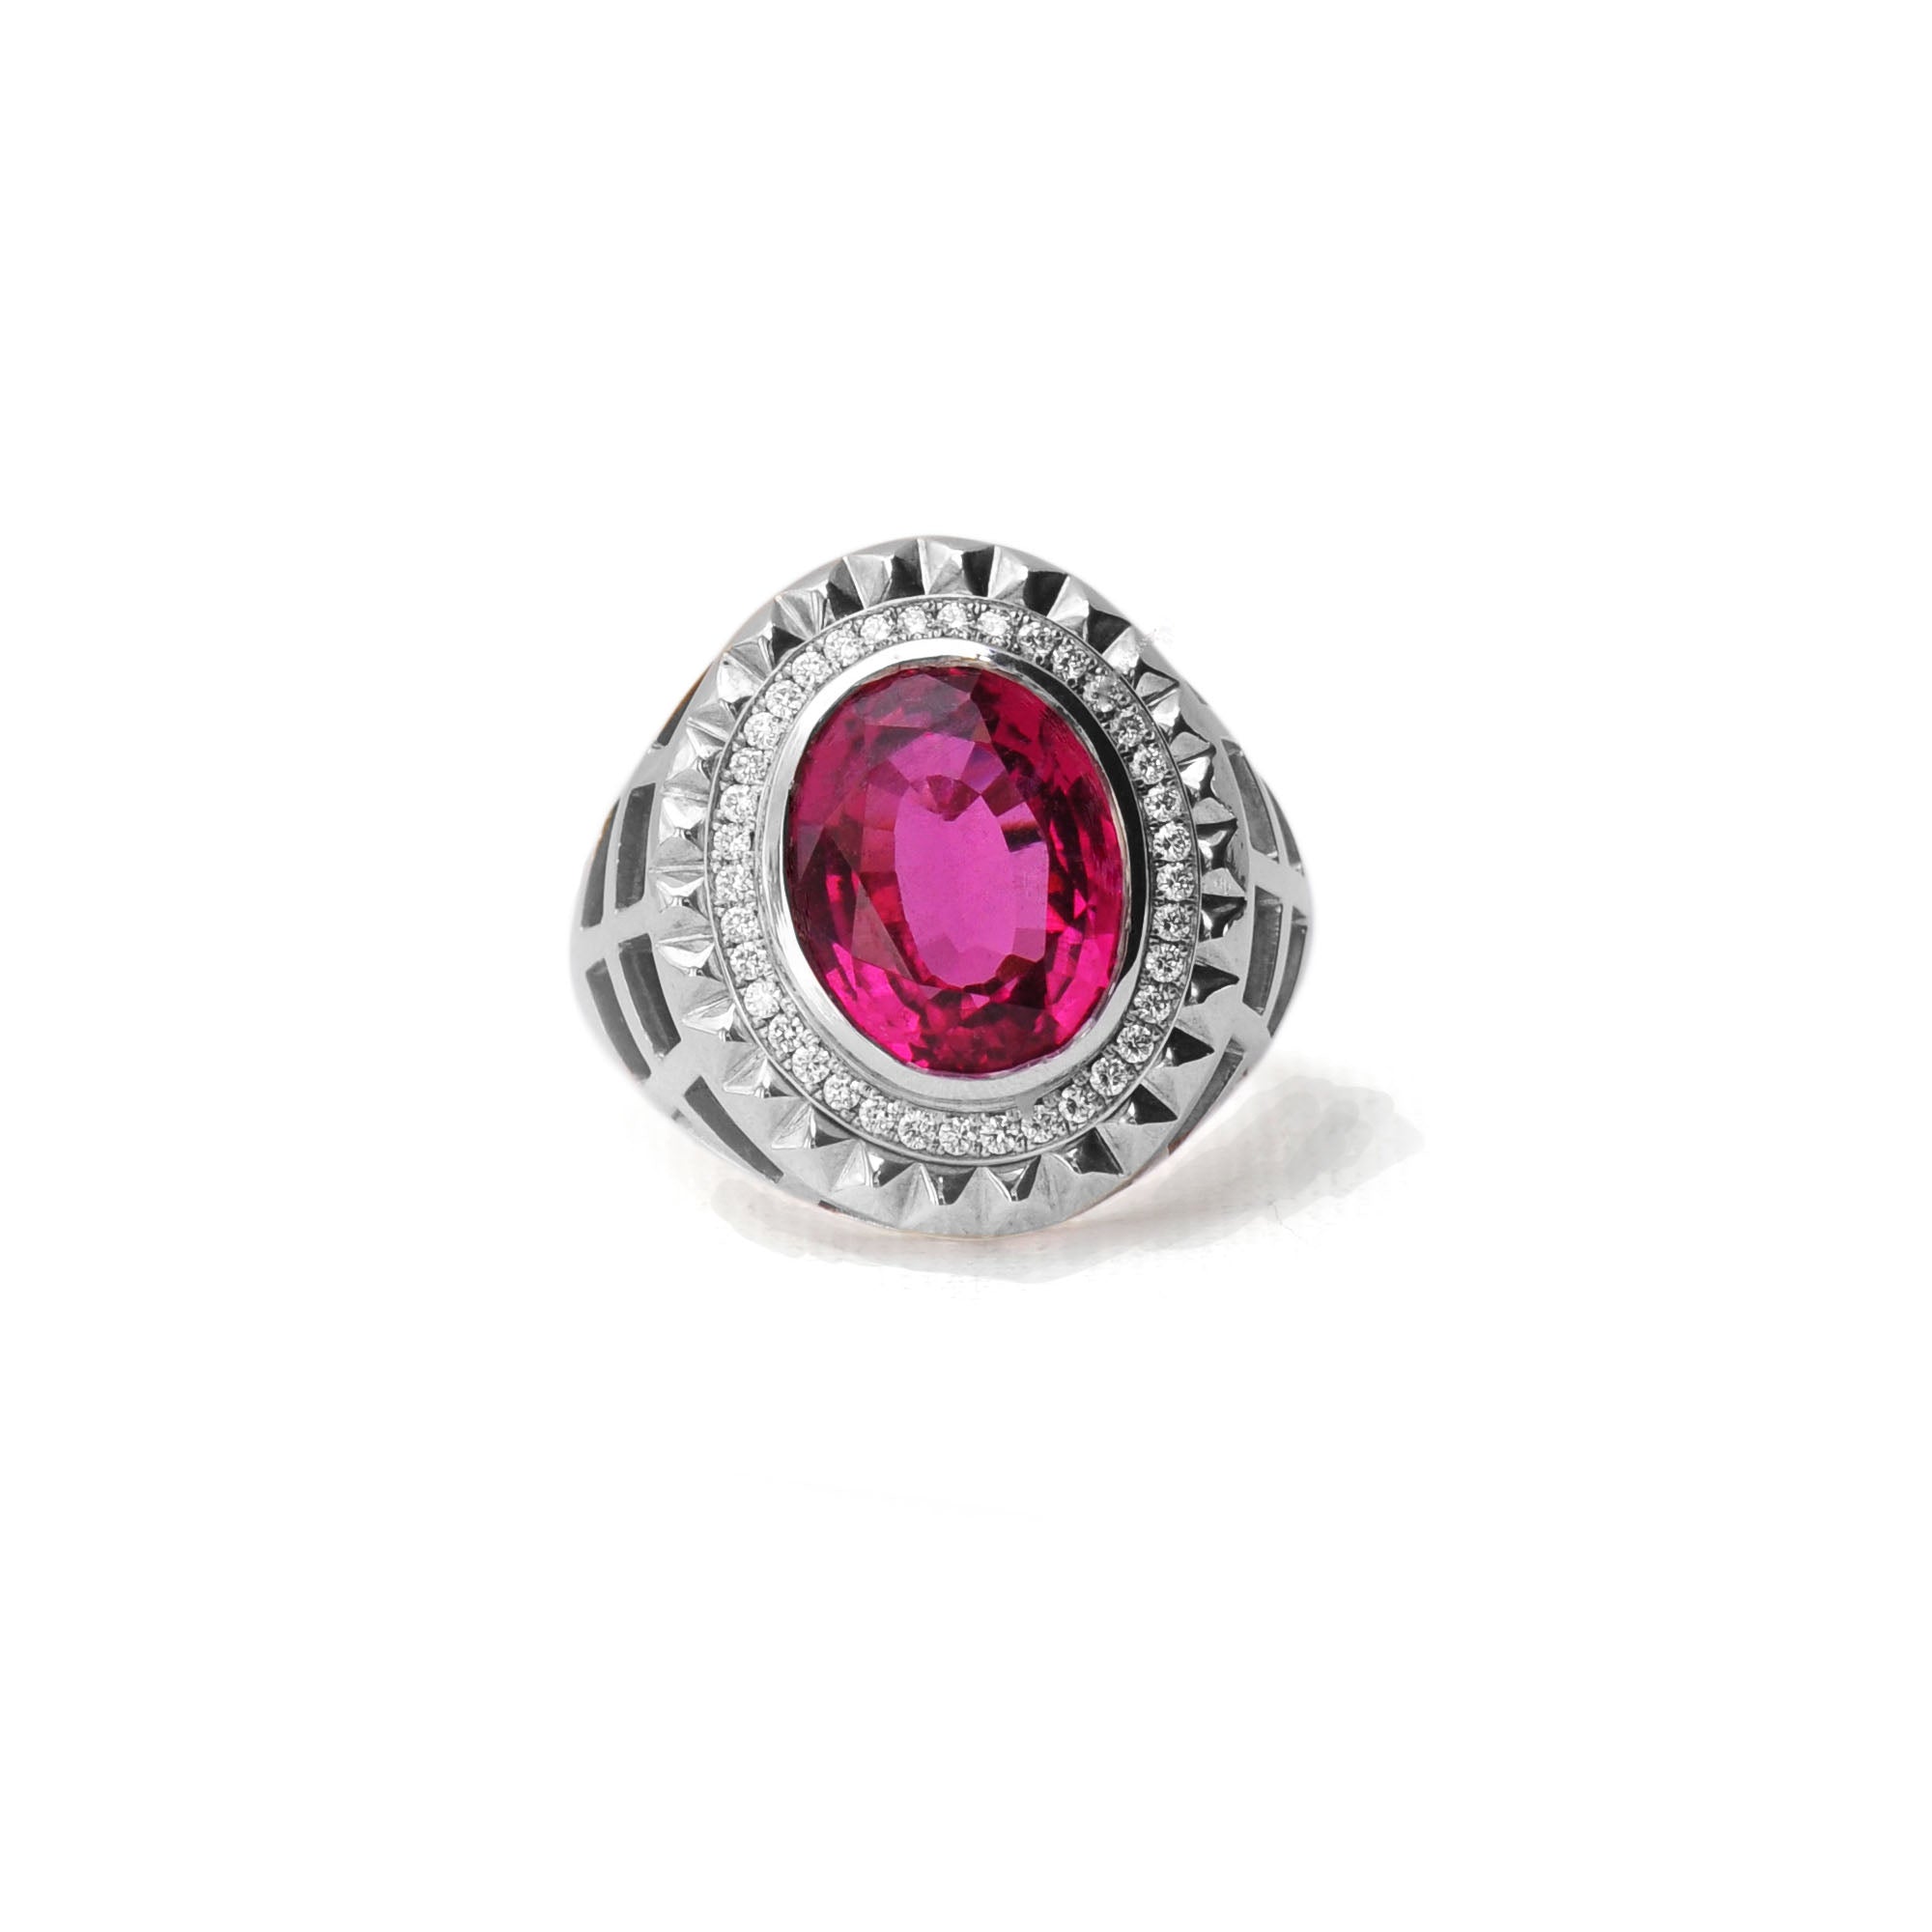 Men’s Ring - Aire-King's Signet - Red Tourmaline and Diamond Ring